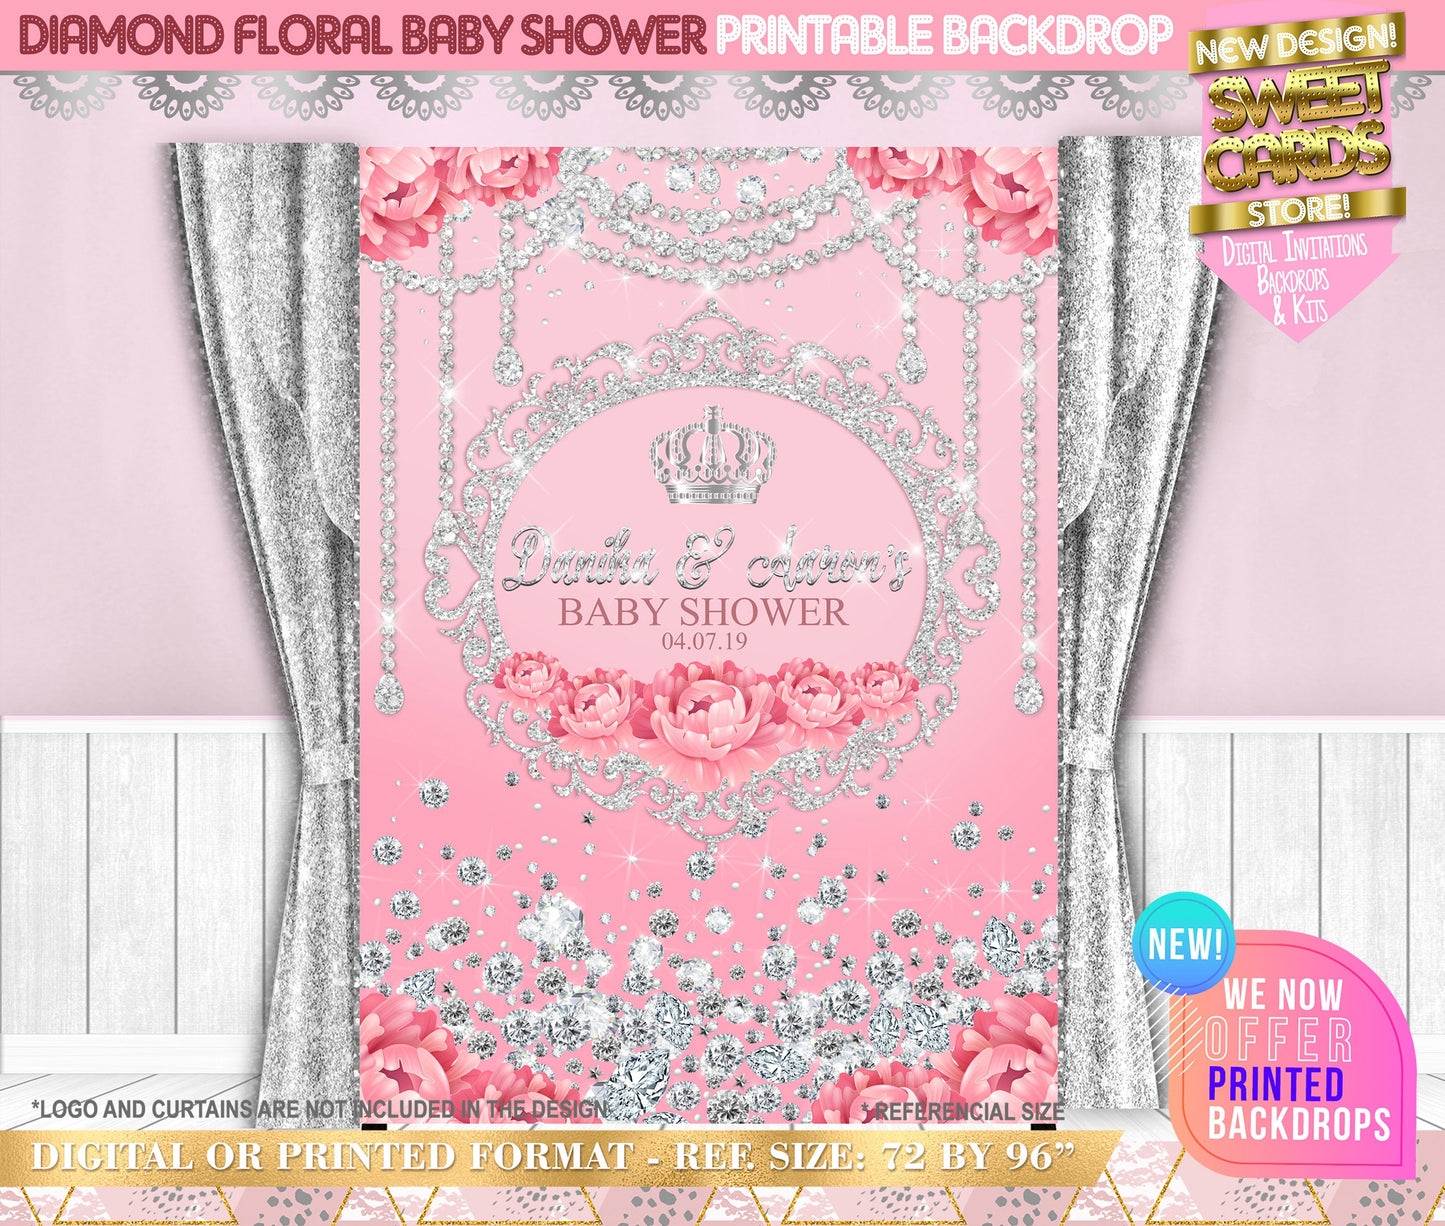 Diamond and Flowers Baby shower Backdrop, Diamonds backdrop, Flowers baby shower, Elegant diamonds baby shower backdrop, Baby shower girl